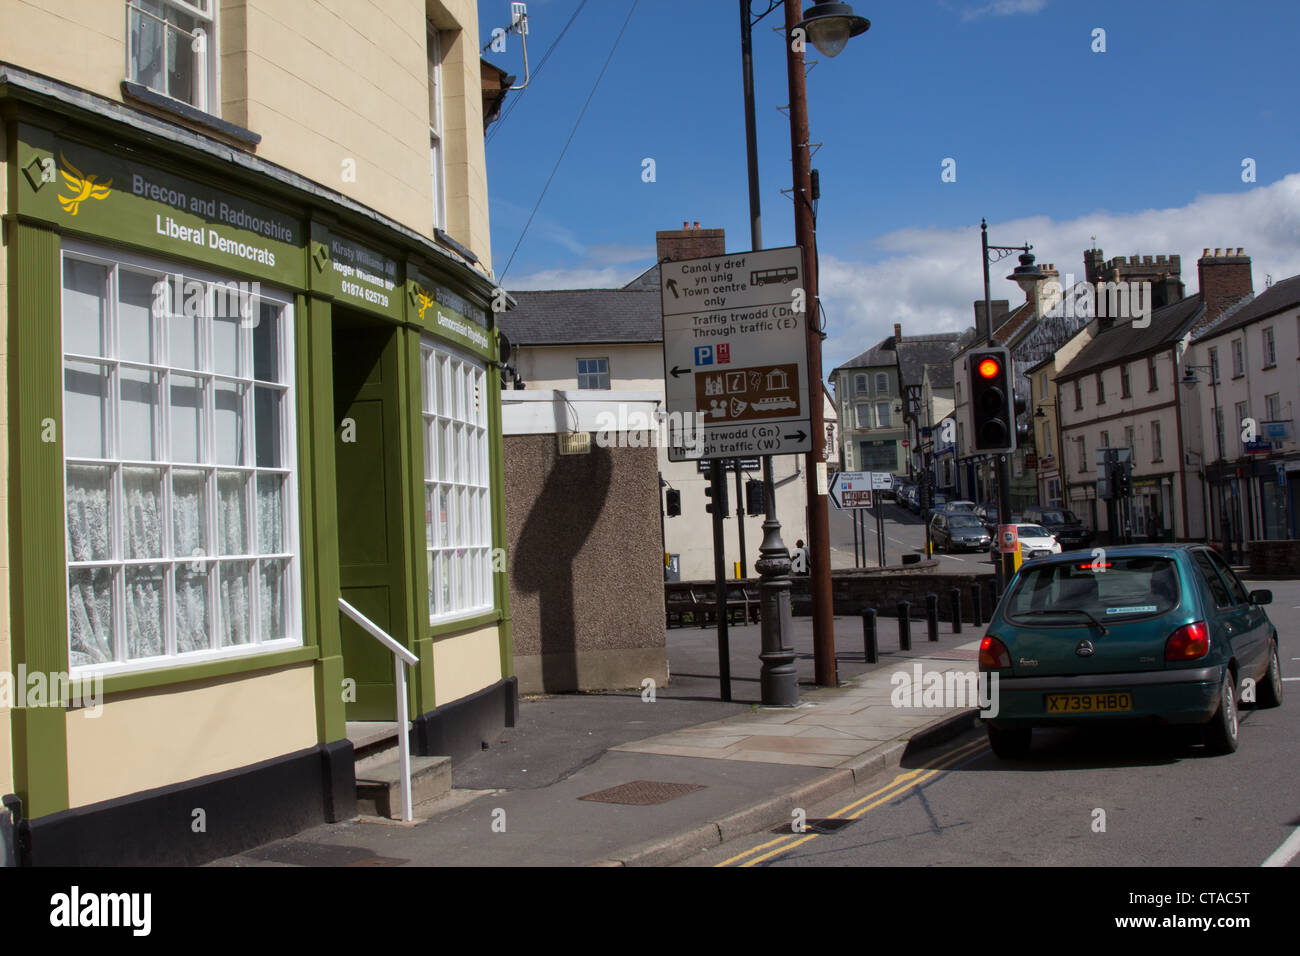 Liberal Democrat offices in the centre of Brecon, Powys, Wales, UK. Kirsty Willaims AM, Roger Williams MP Stock Photo